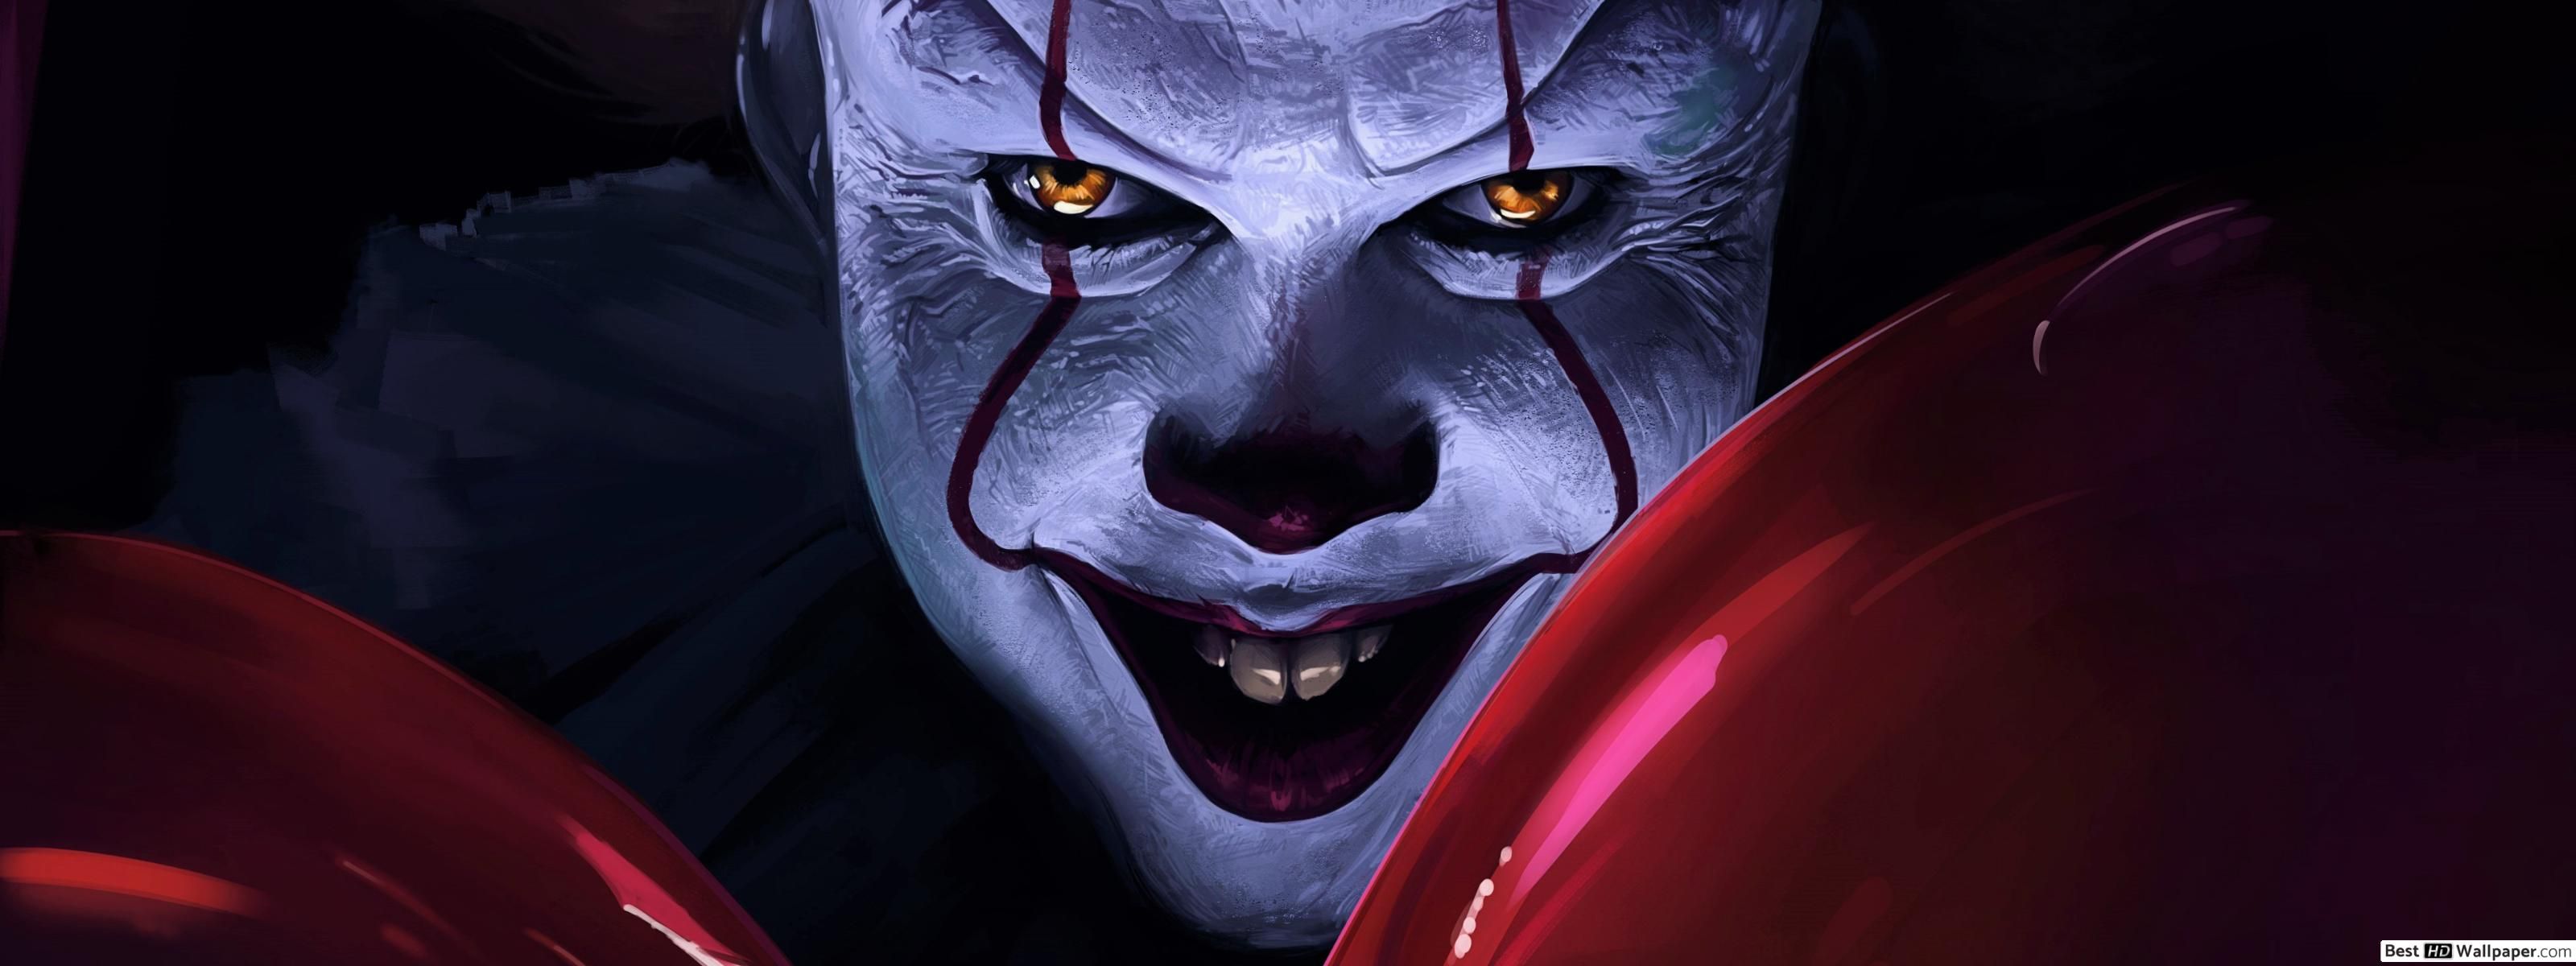 Pennywise HD wallpaper download